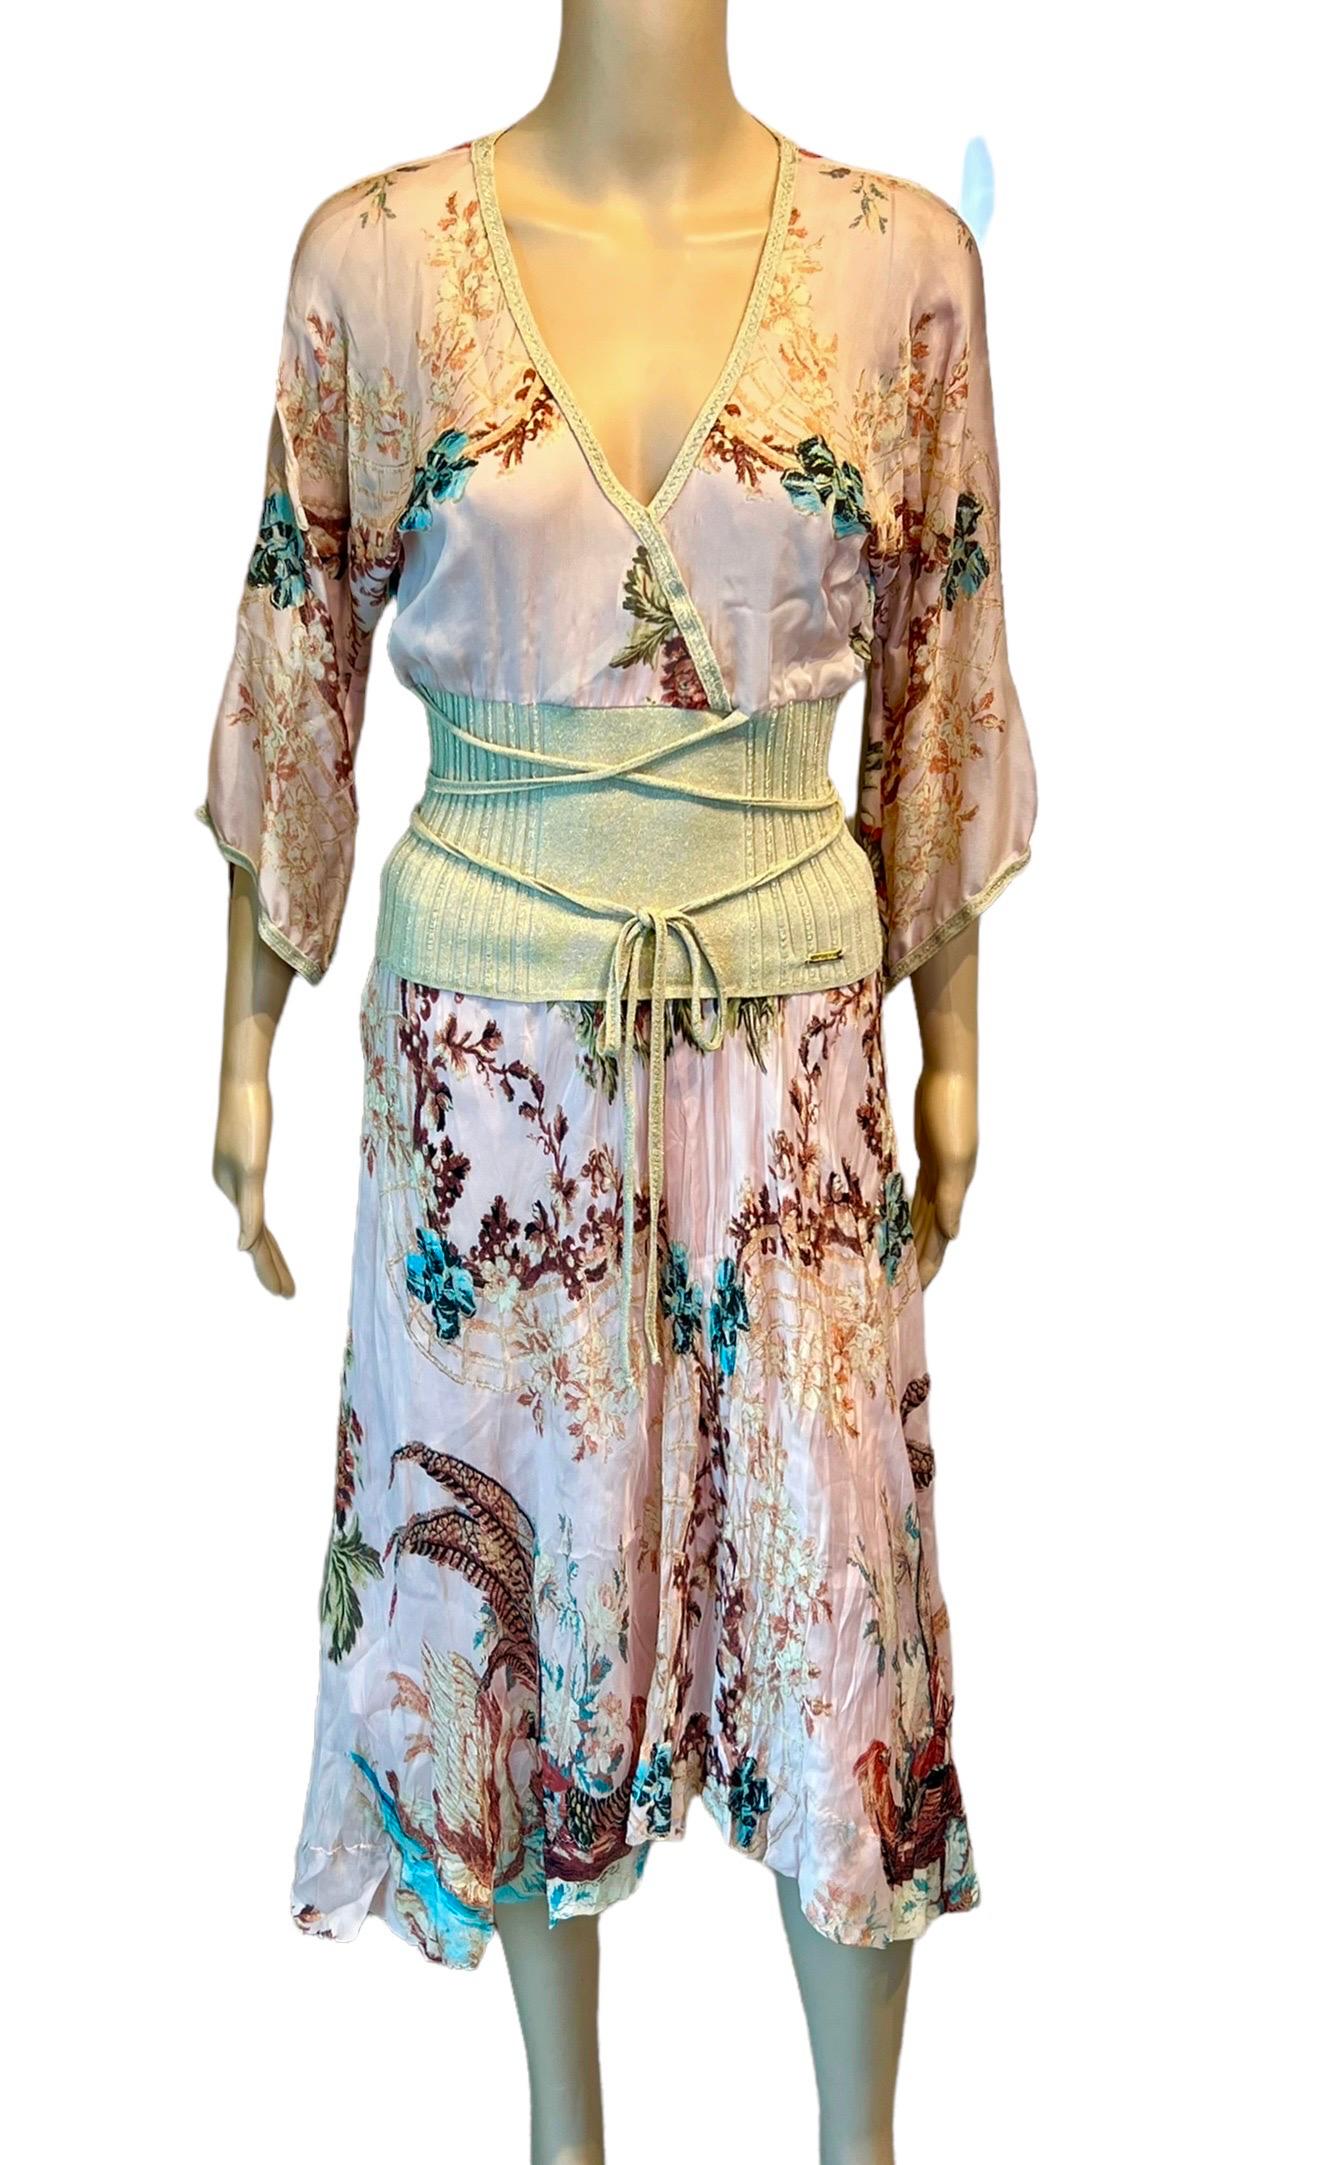 Roberto Cavalli S/S 2003 Chinoiserie Print Blouse Top and Midi Skirt 2 Piece Set Size S/M

Please note the skirt is size S and the top is size M.